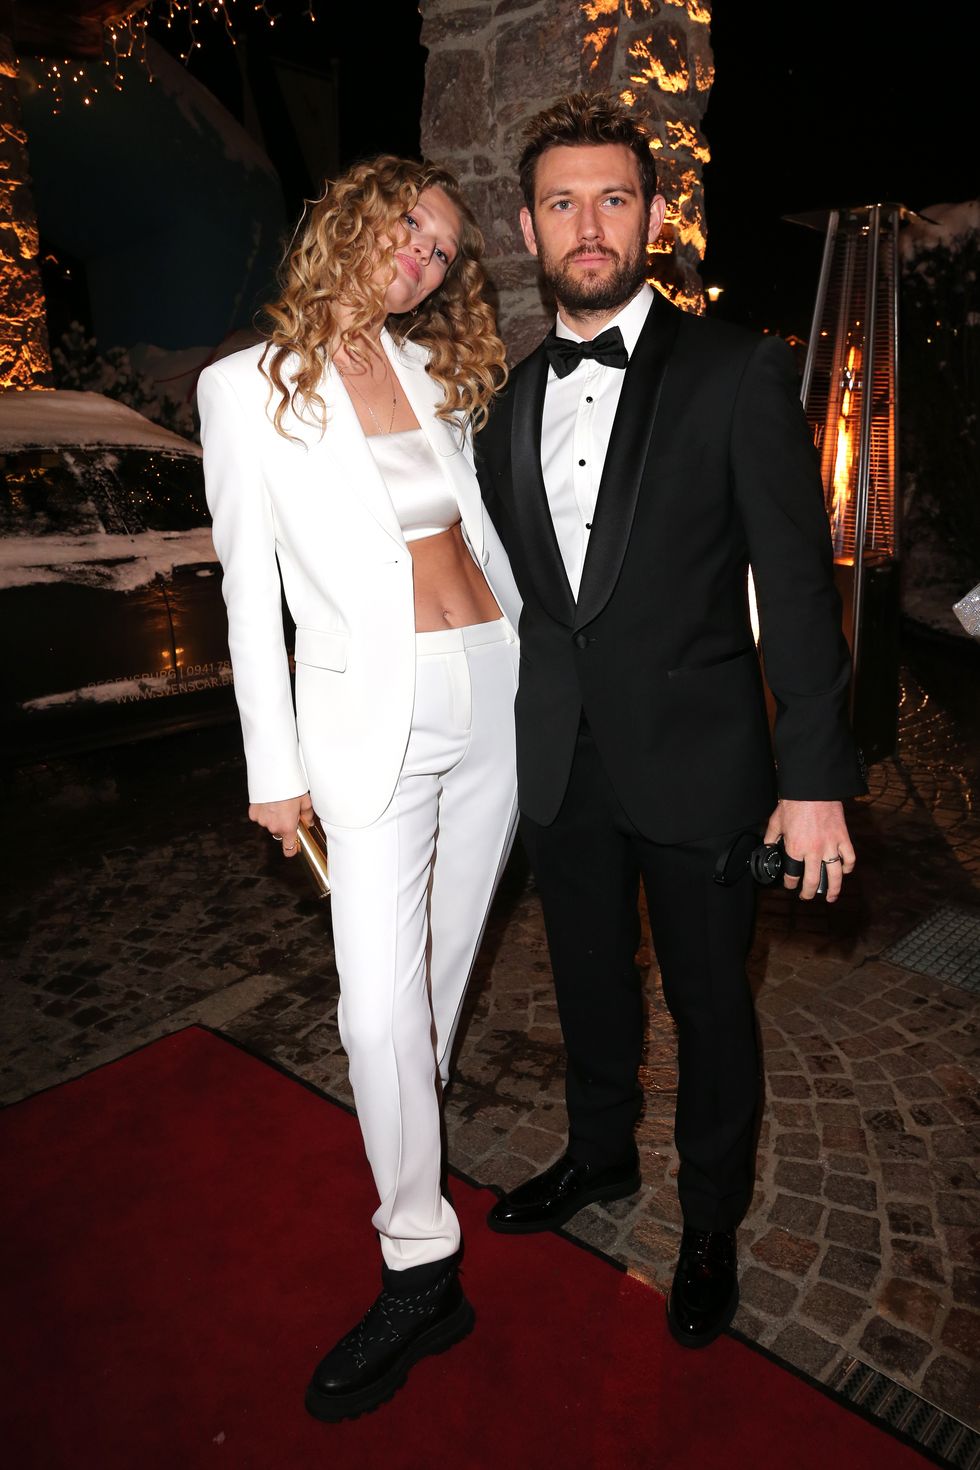 kitzbuehel, austria january 21 toni garrn and alex pettyfer attend the hummerparty during the hahnenkammrennen at hotel kitzhof on january 21, 2023 in kitzbühel, austria photo by gisela schobergetty images